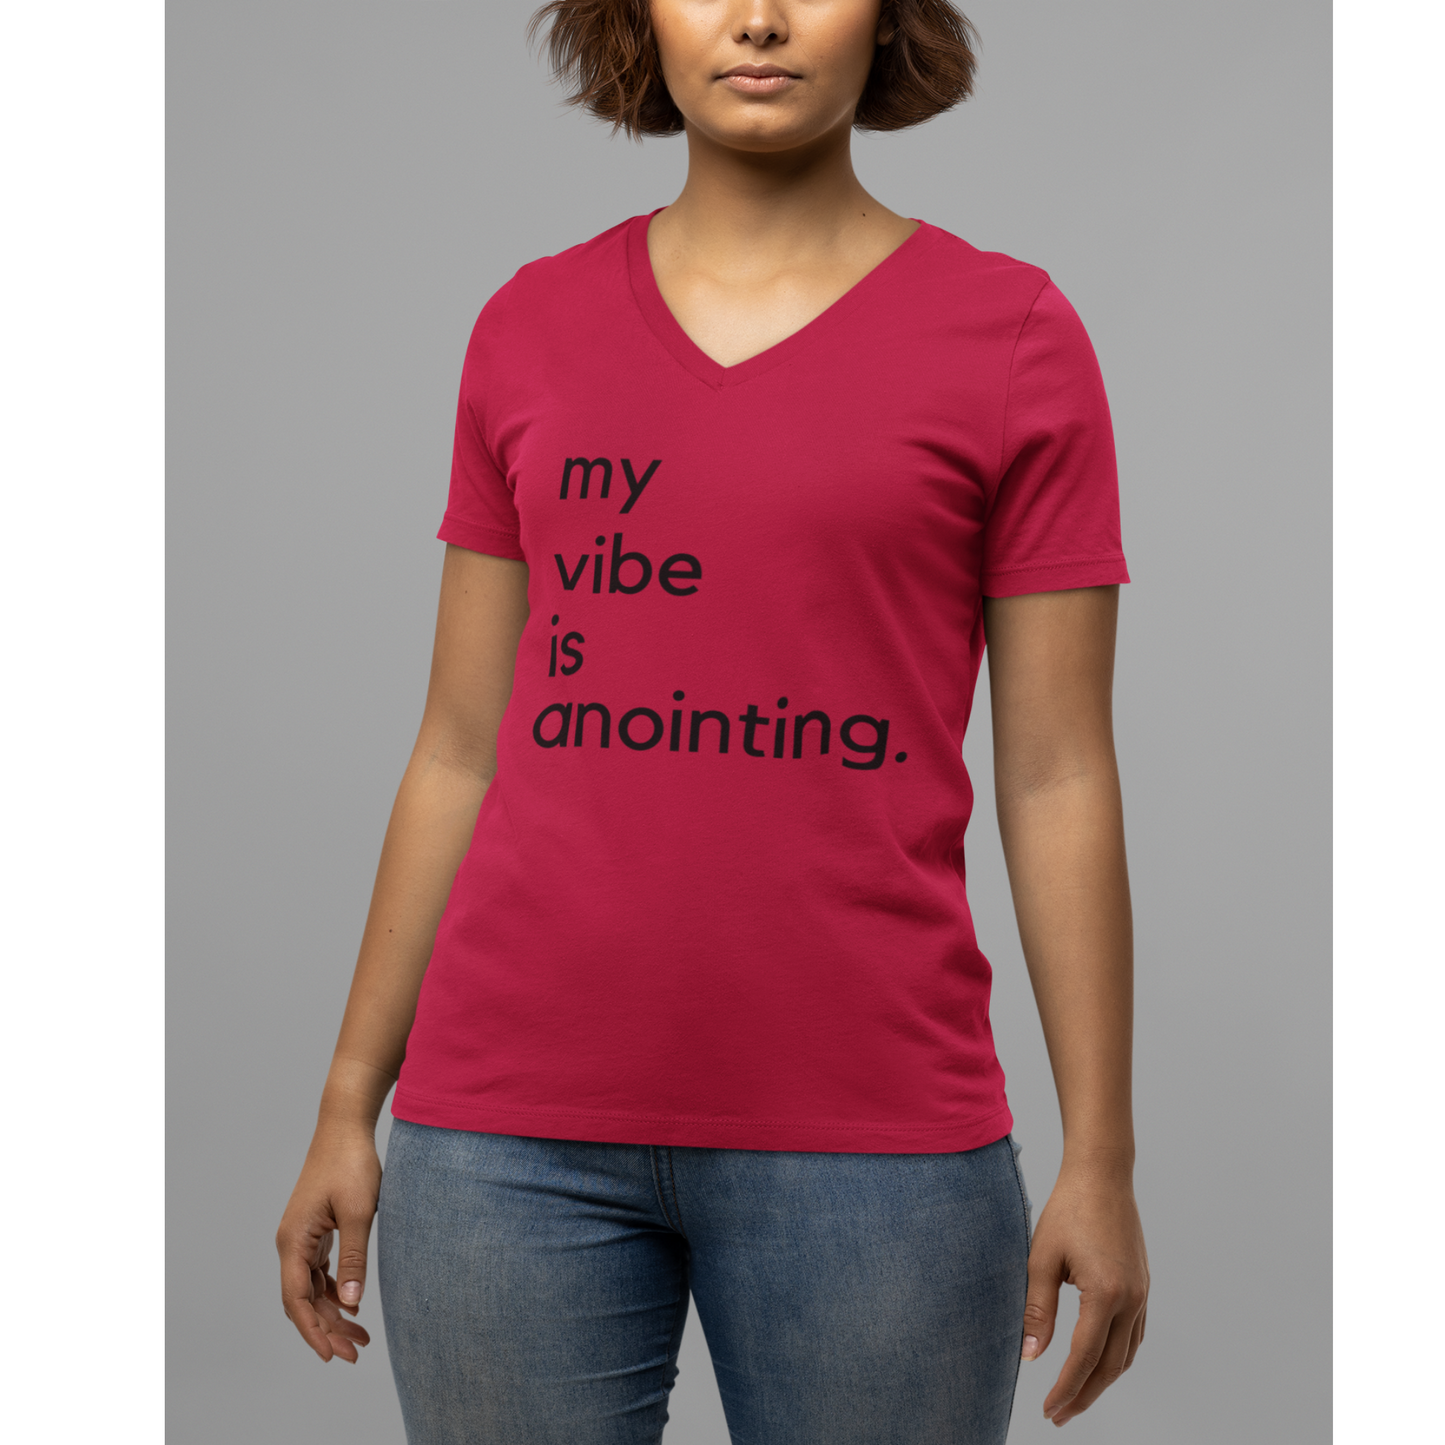 My Vibe Is Anointing (Graphic Black Text) Unisex Jersey Short Sleeve V-Neck Tee - Style: Bella+Canvas 3005